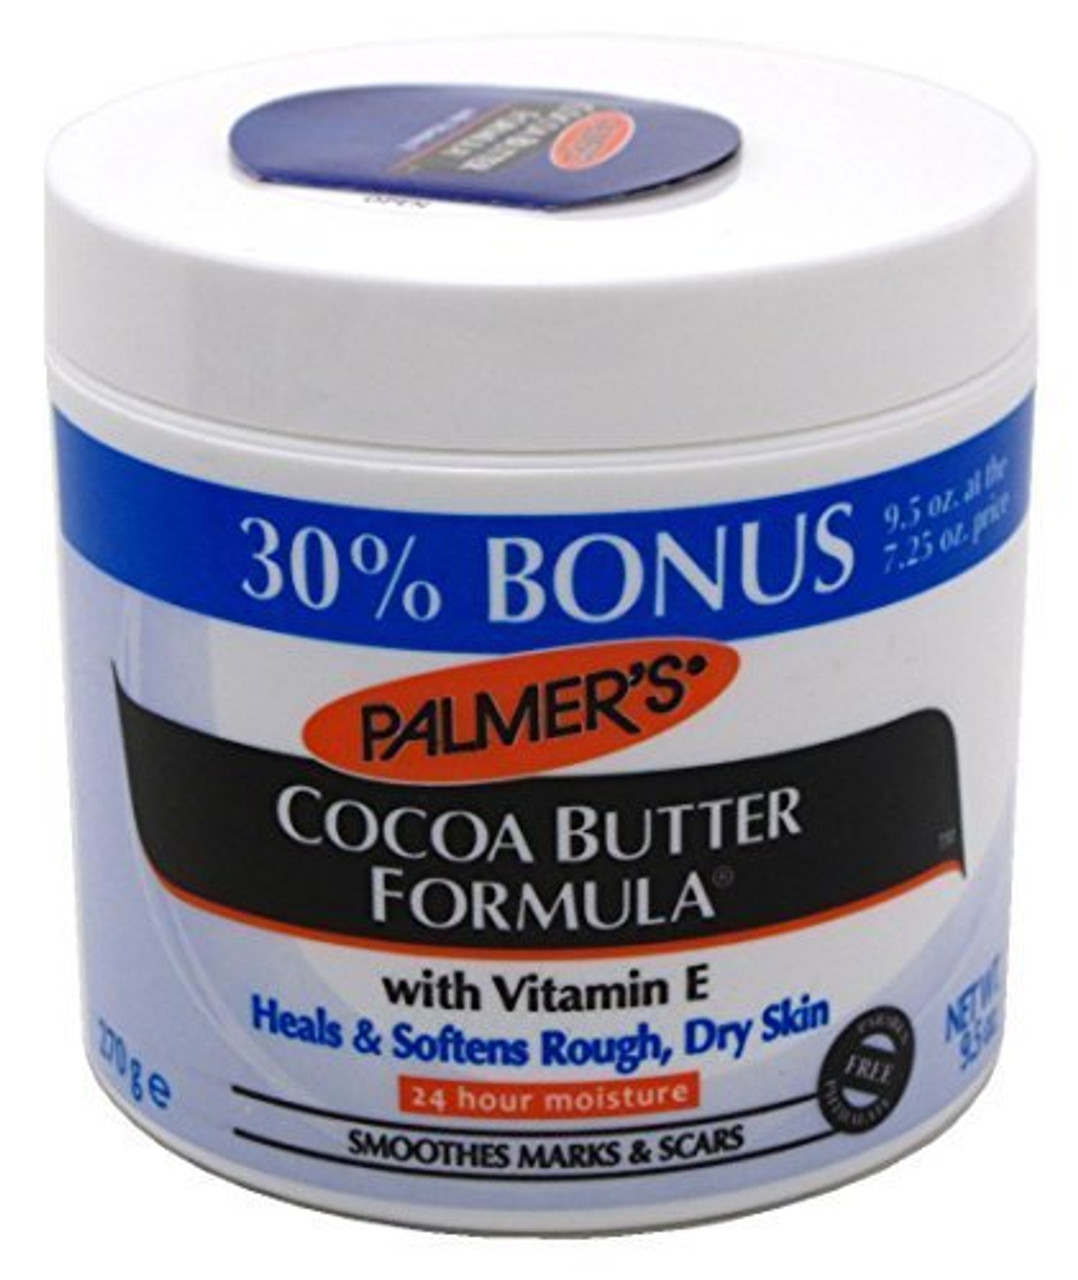 Palmers Cocoa Butter Formula With Vitamin E Lotion Pack of 2 7.25